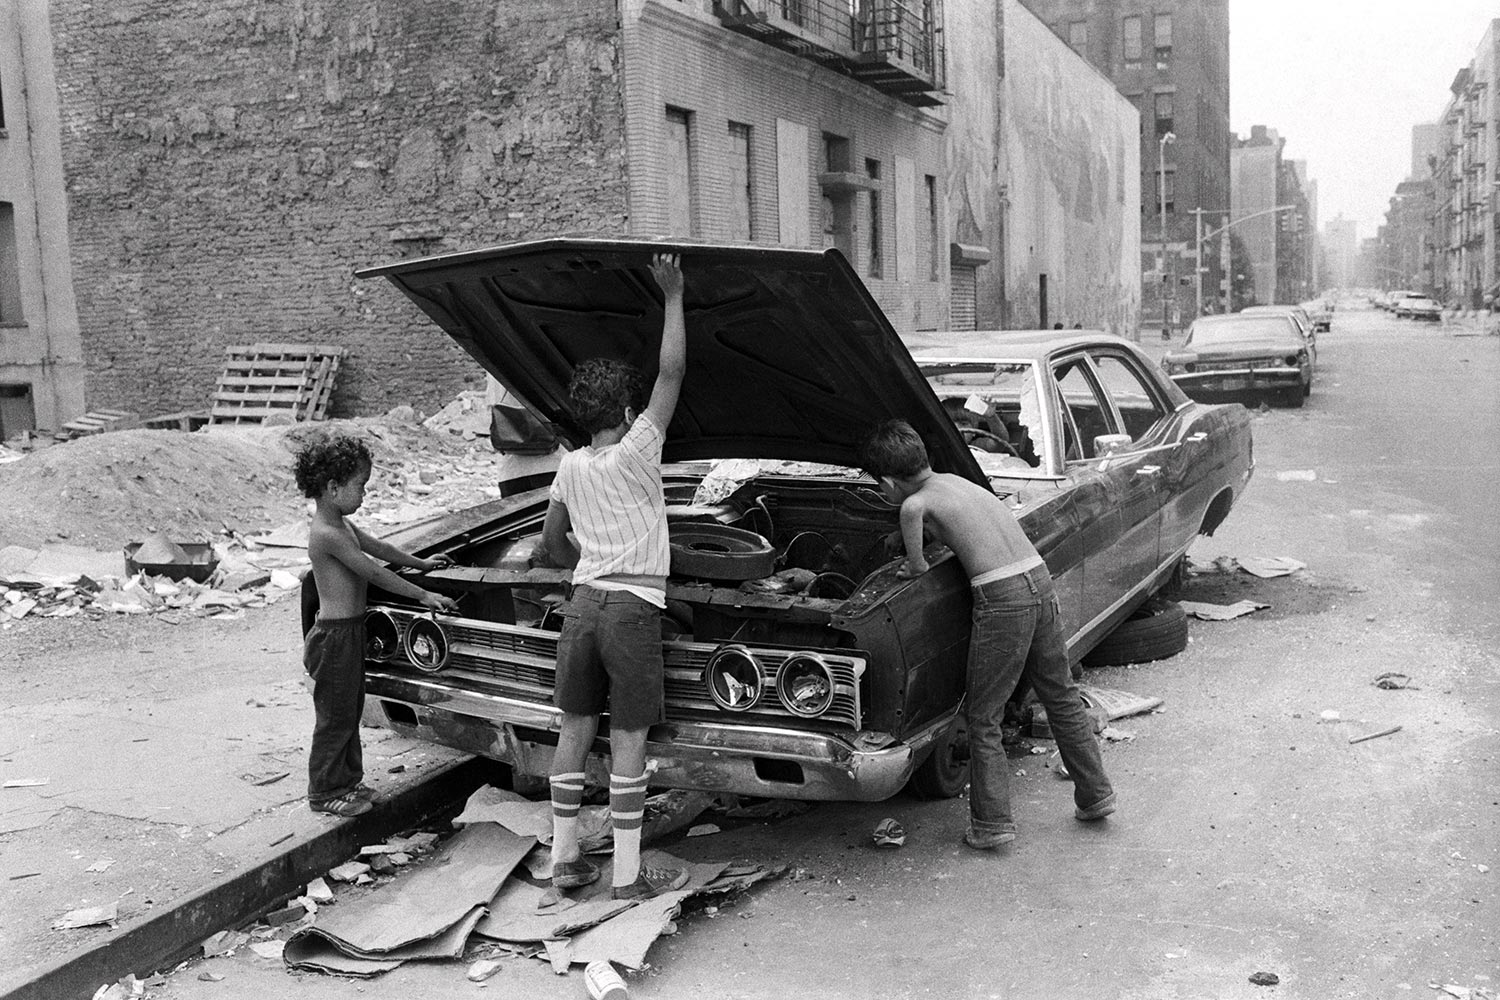 Lower East Side, New York City, 1978. Kids playing in street with car